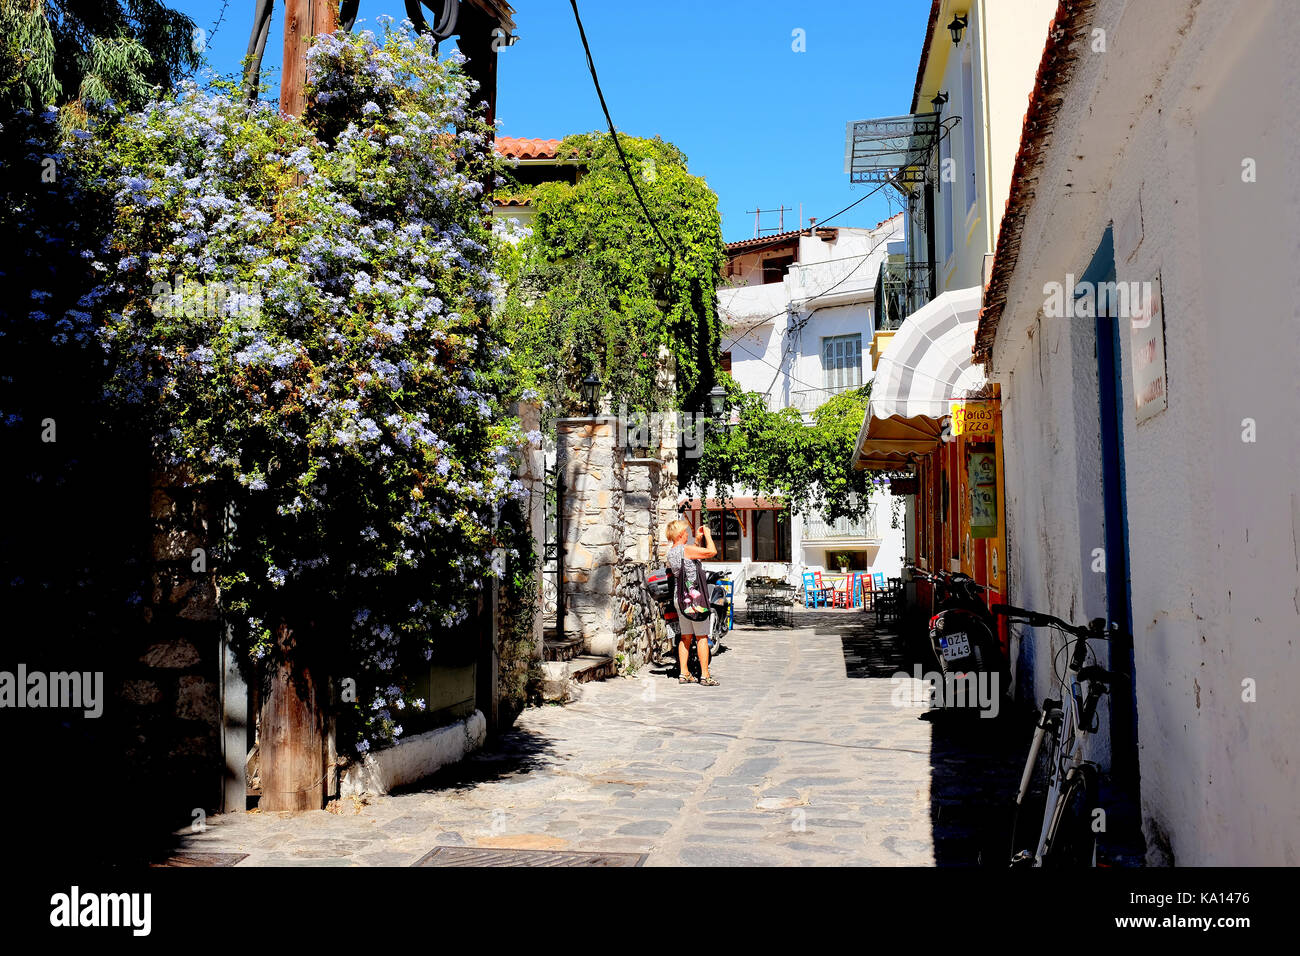 Skiathos, Greece. September 13, 2017.  A colorful street in Skiathos town where nature takes over with flowers and climbing plants in the back streets Stock Photo